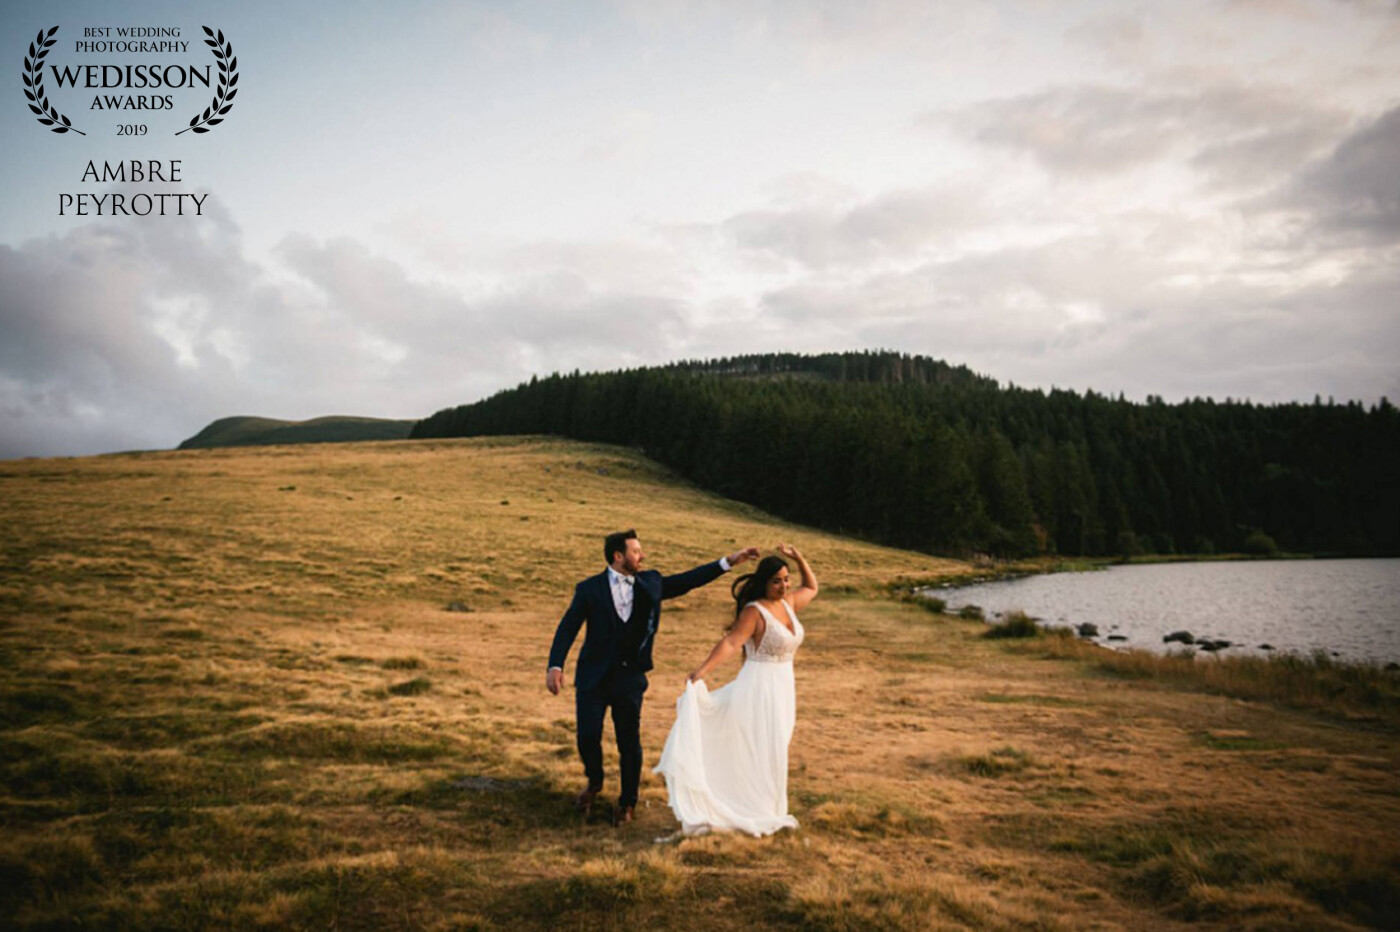 Elodie and Dean got married this summer and they wanted something special to remember this beautiful day. This is why we headed to the moors to create a stunning session at sunset. Even if it was a cloudy day, we still had an amazing light (and extraordinary moments to remember!).